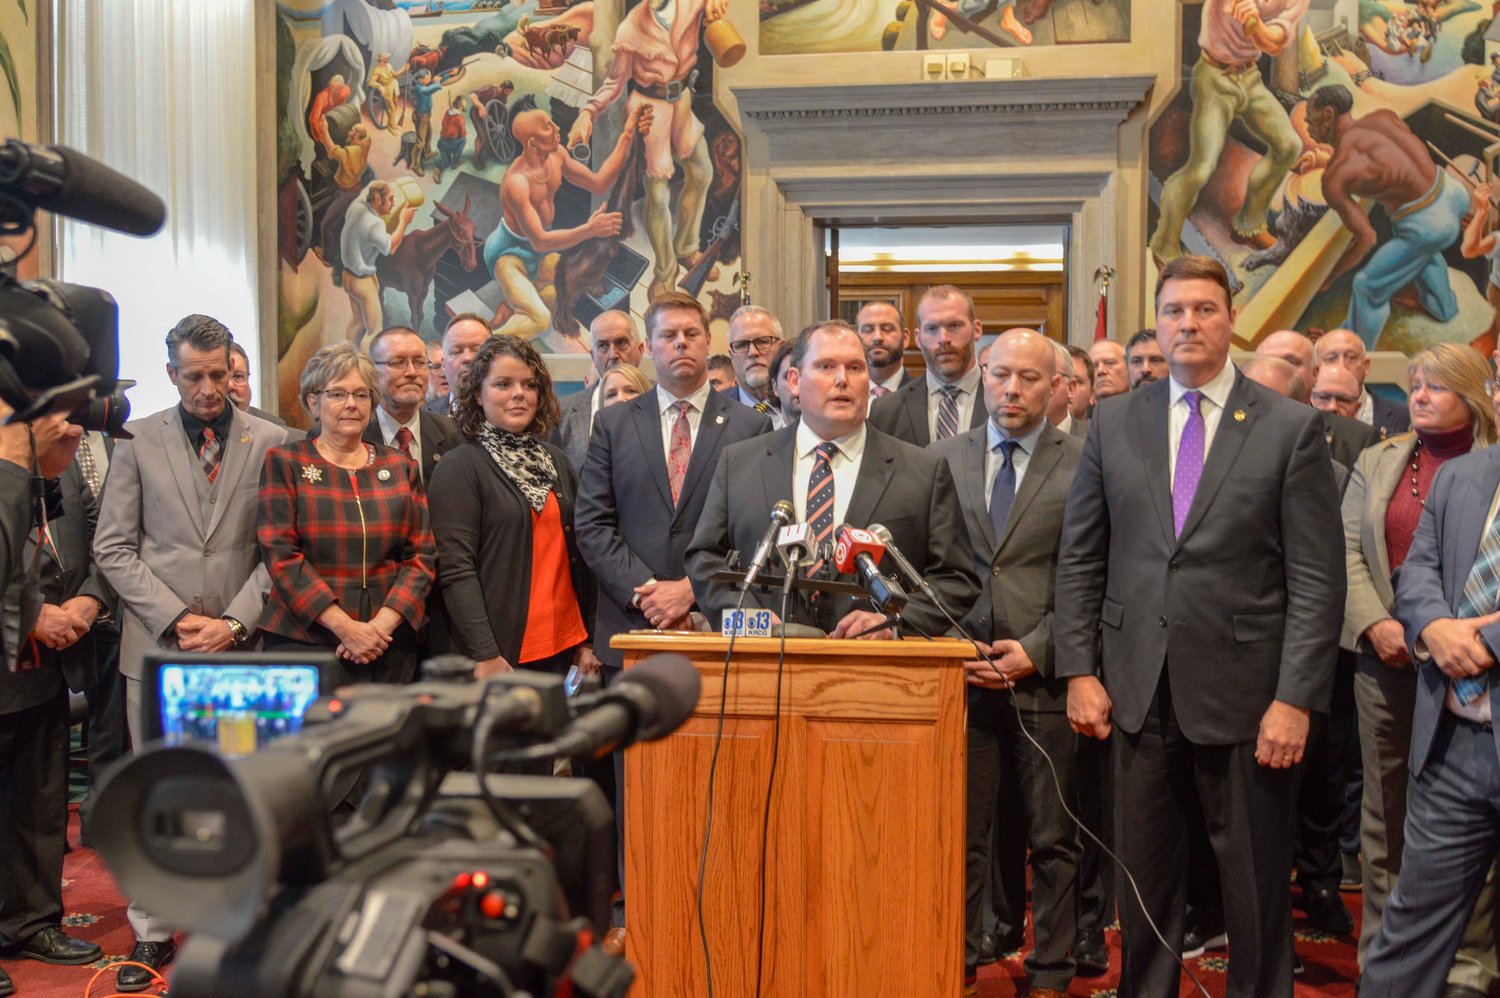 Missouri House Republicans hold a press conference following the opening day of the legislative session Wednesday, Jan. 5. (Courtesy of Missouri House Communications)